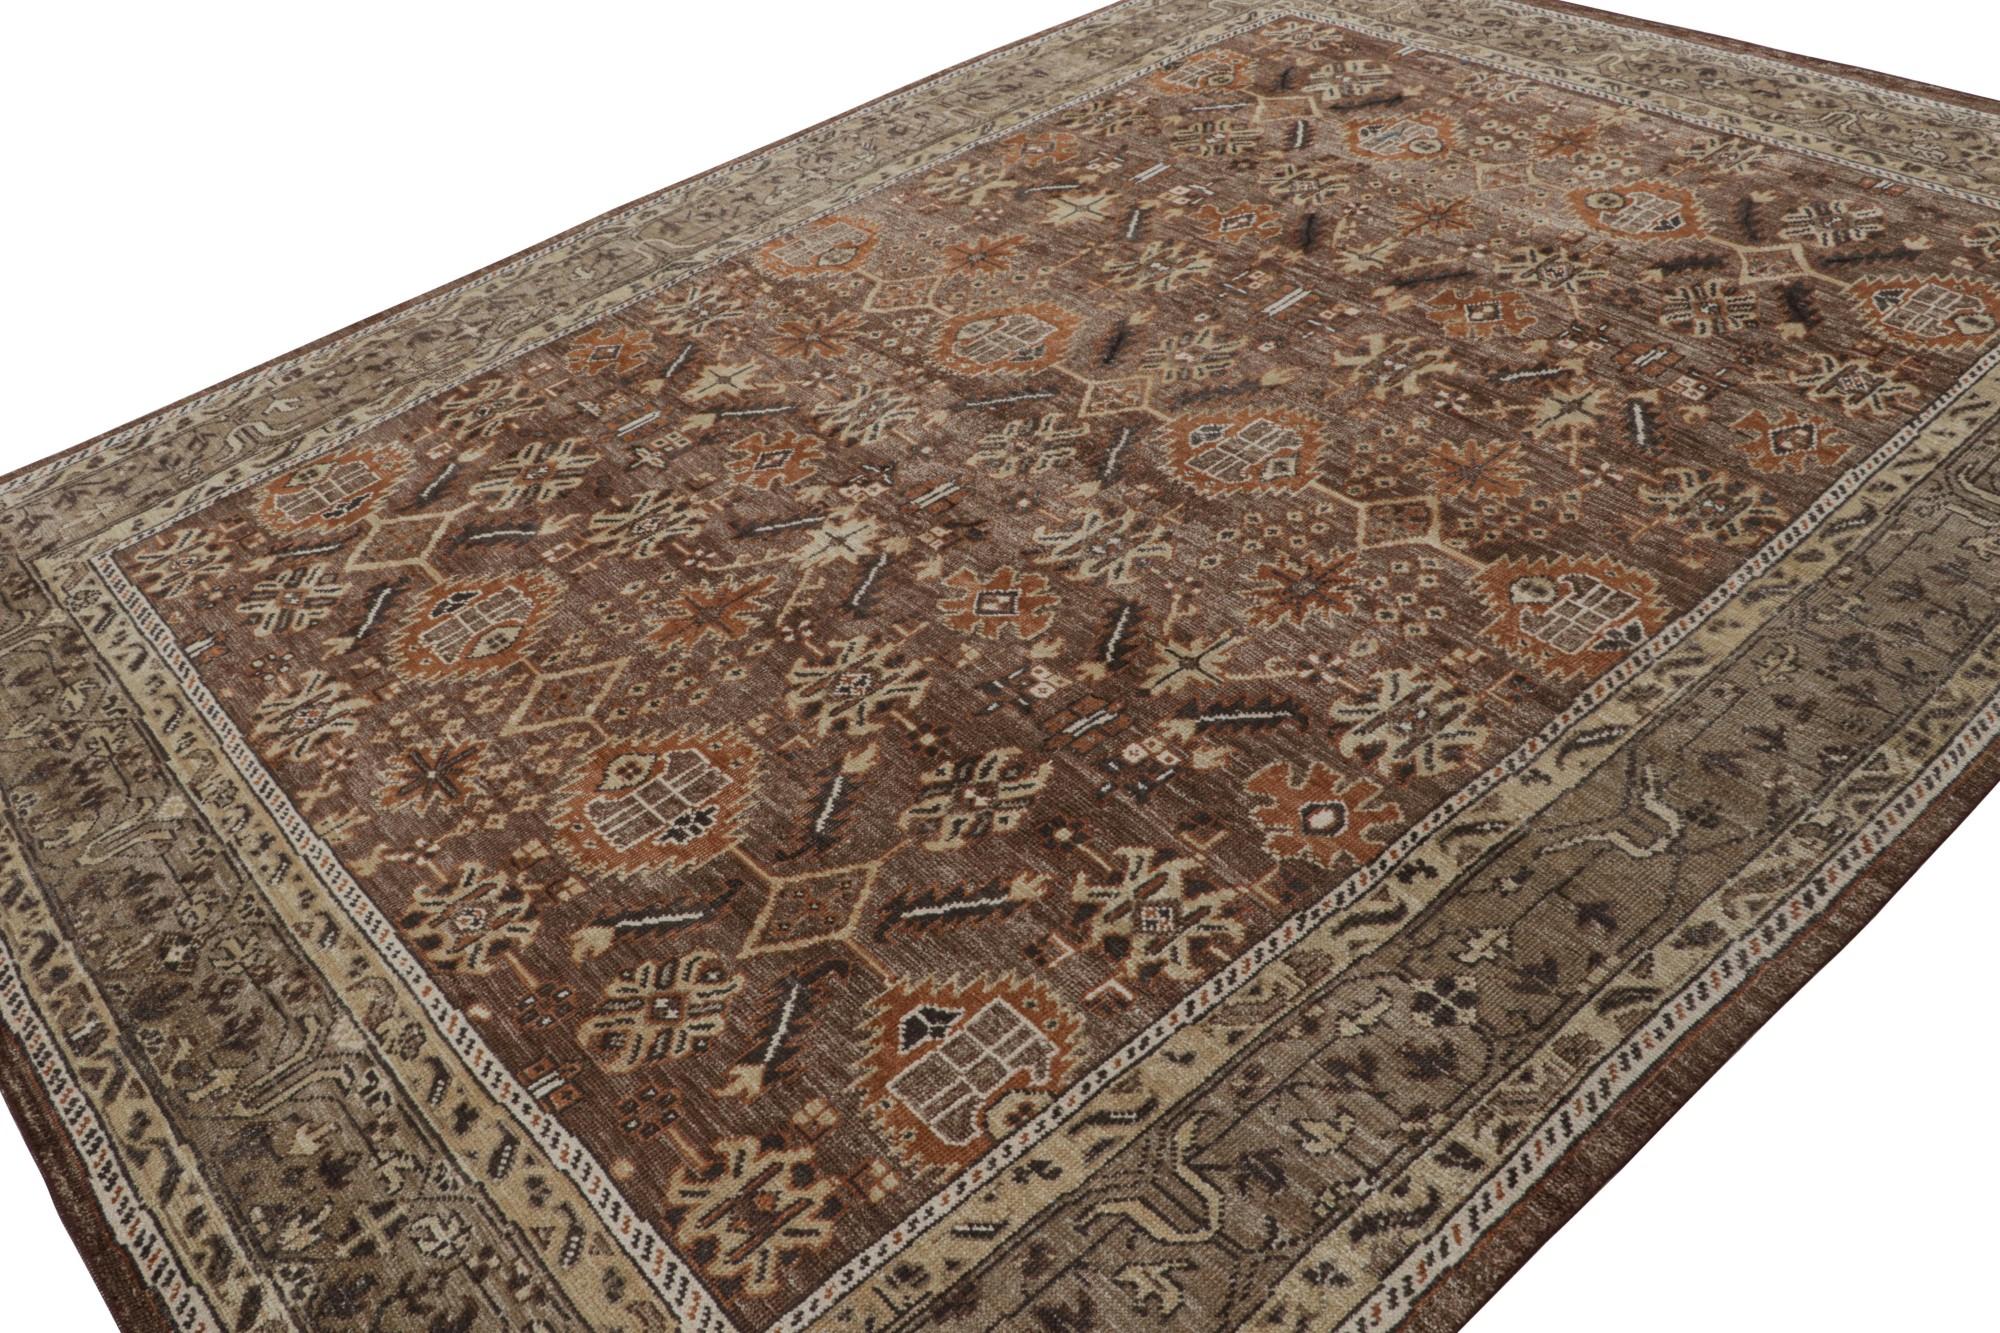 This 8x12 rug from the Modern Classics Collection by Rug & Kilim is from a new line inspired by antique Oushak rugs. Hand-knotted in wool & sari silk, its design enjoys geometric motifs and tribal floral patterns in brown and rust tone colors, with